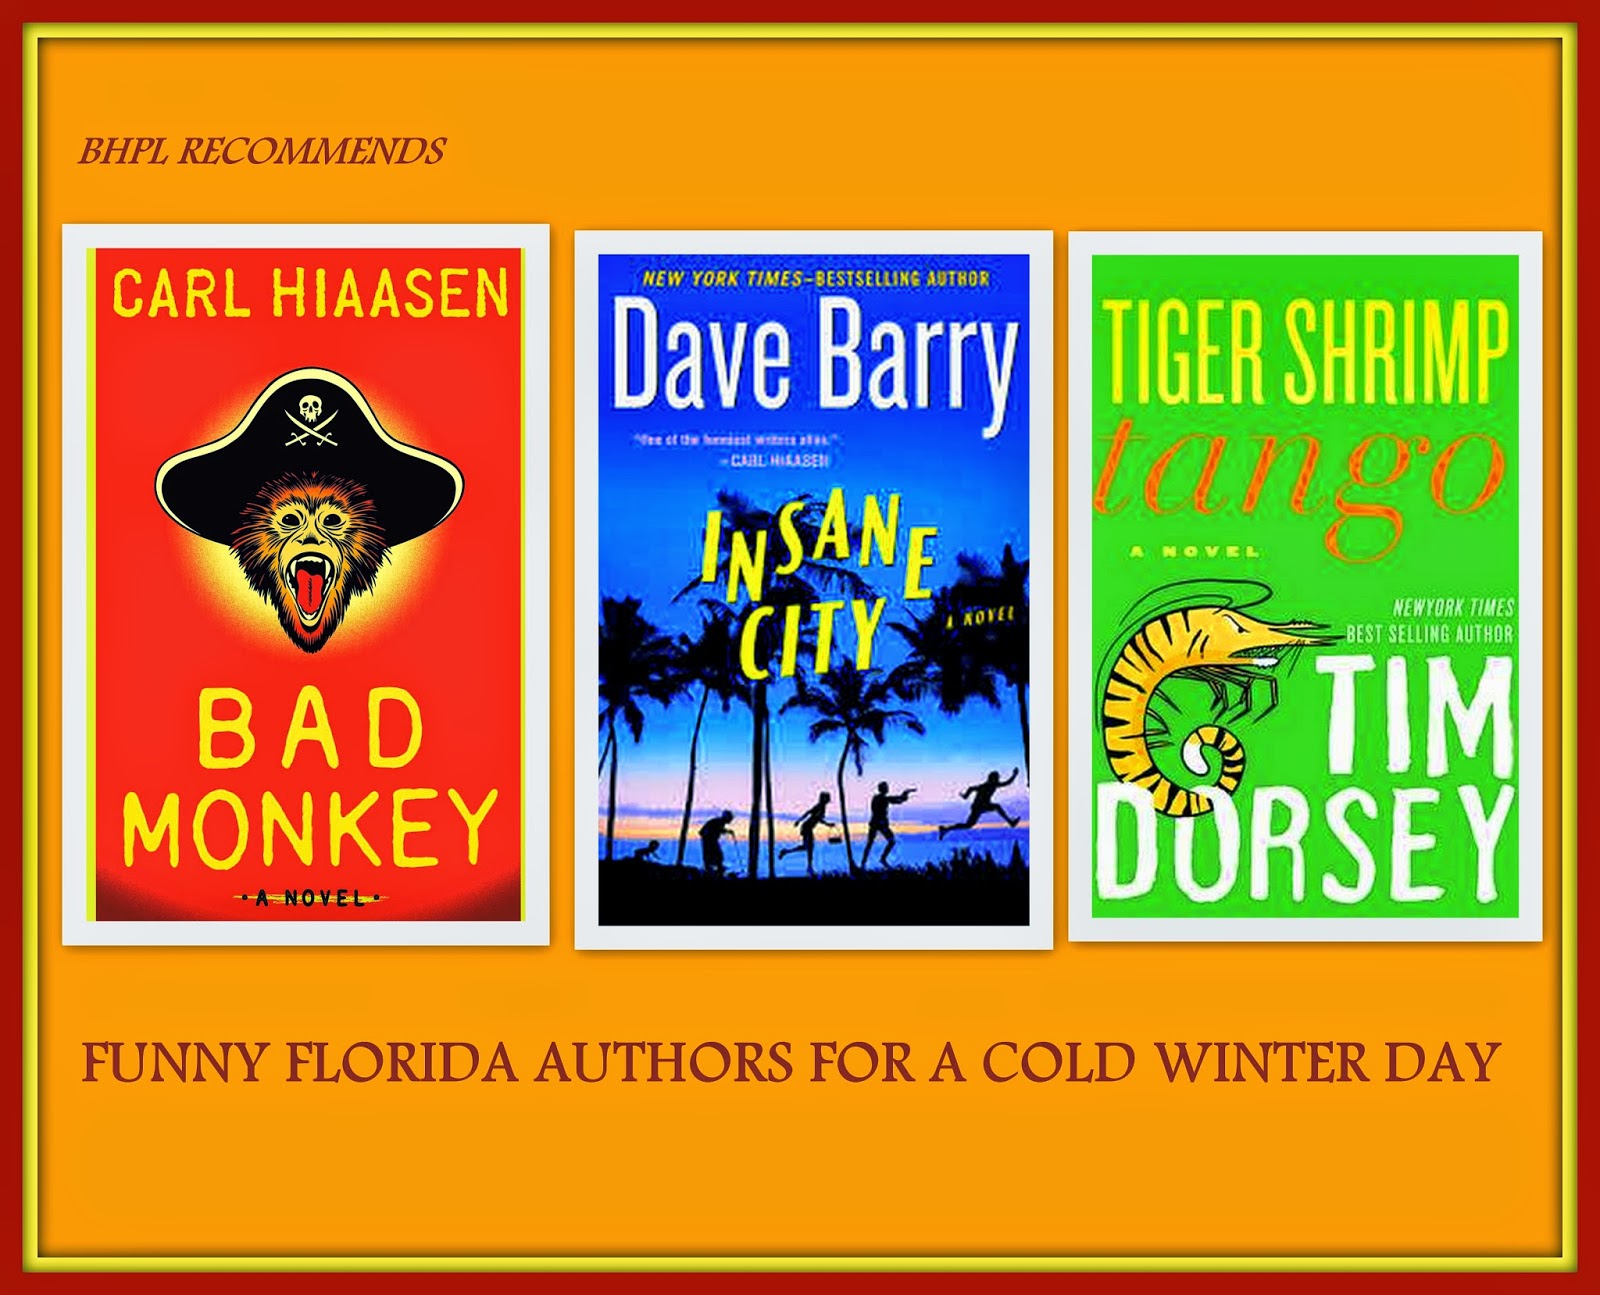 Funny Florida authors Picasa collage